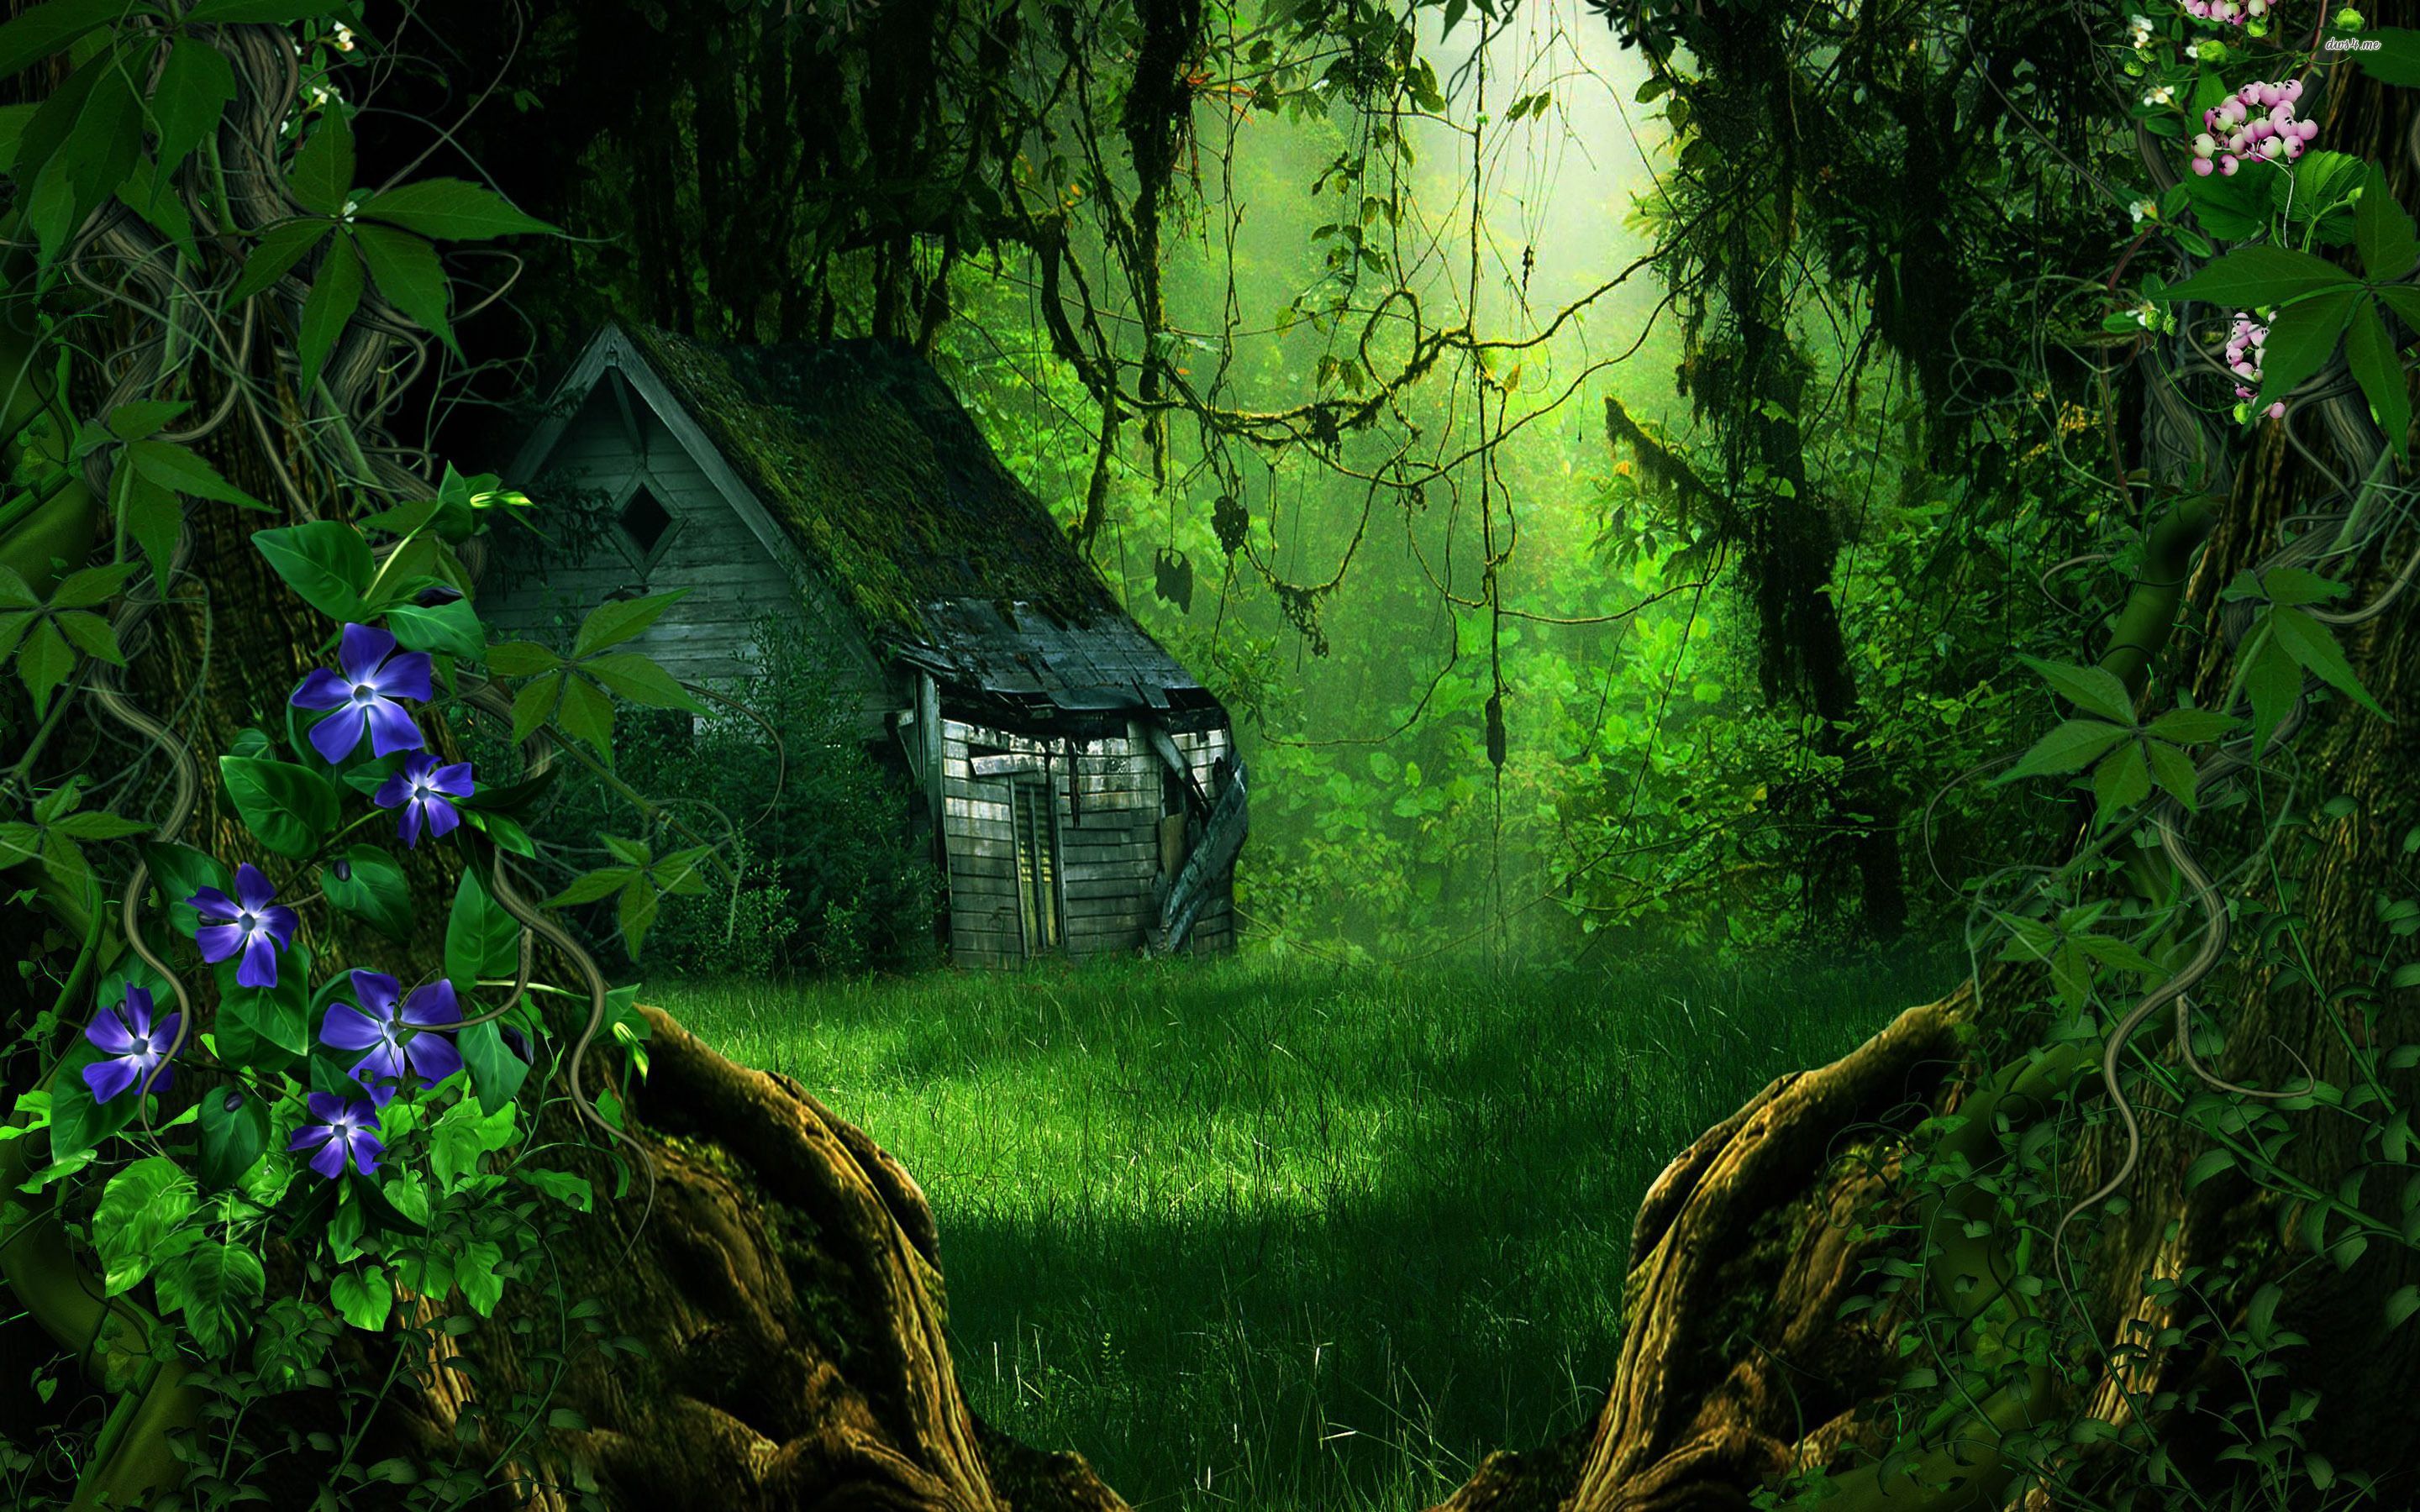 Halloween Background For Fairy Gardens. File Name, 18774 Abandoned House In The Forest 2880x1800 Fantasy. Forest Wallpaper, Forest House, Fantasy Forest